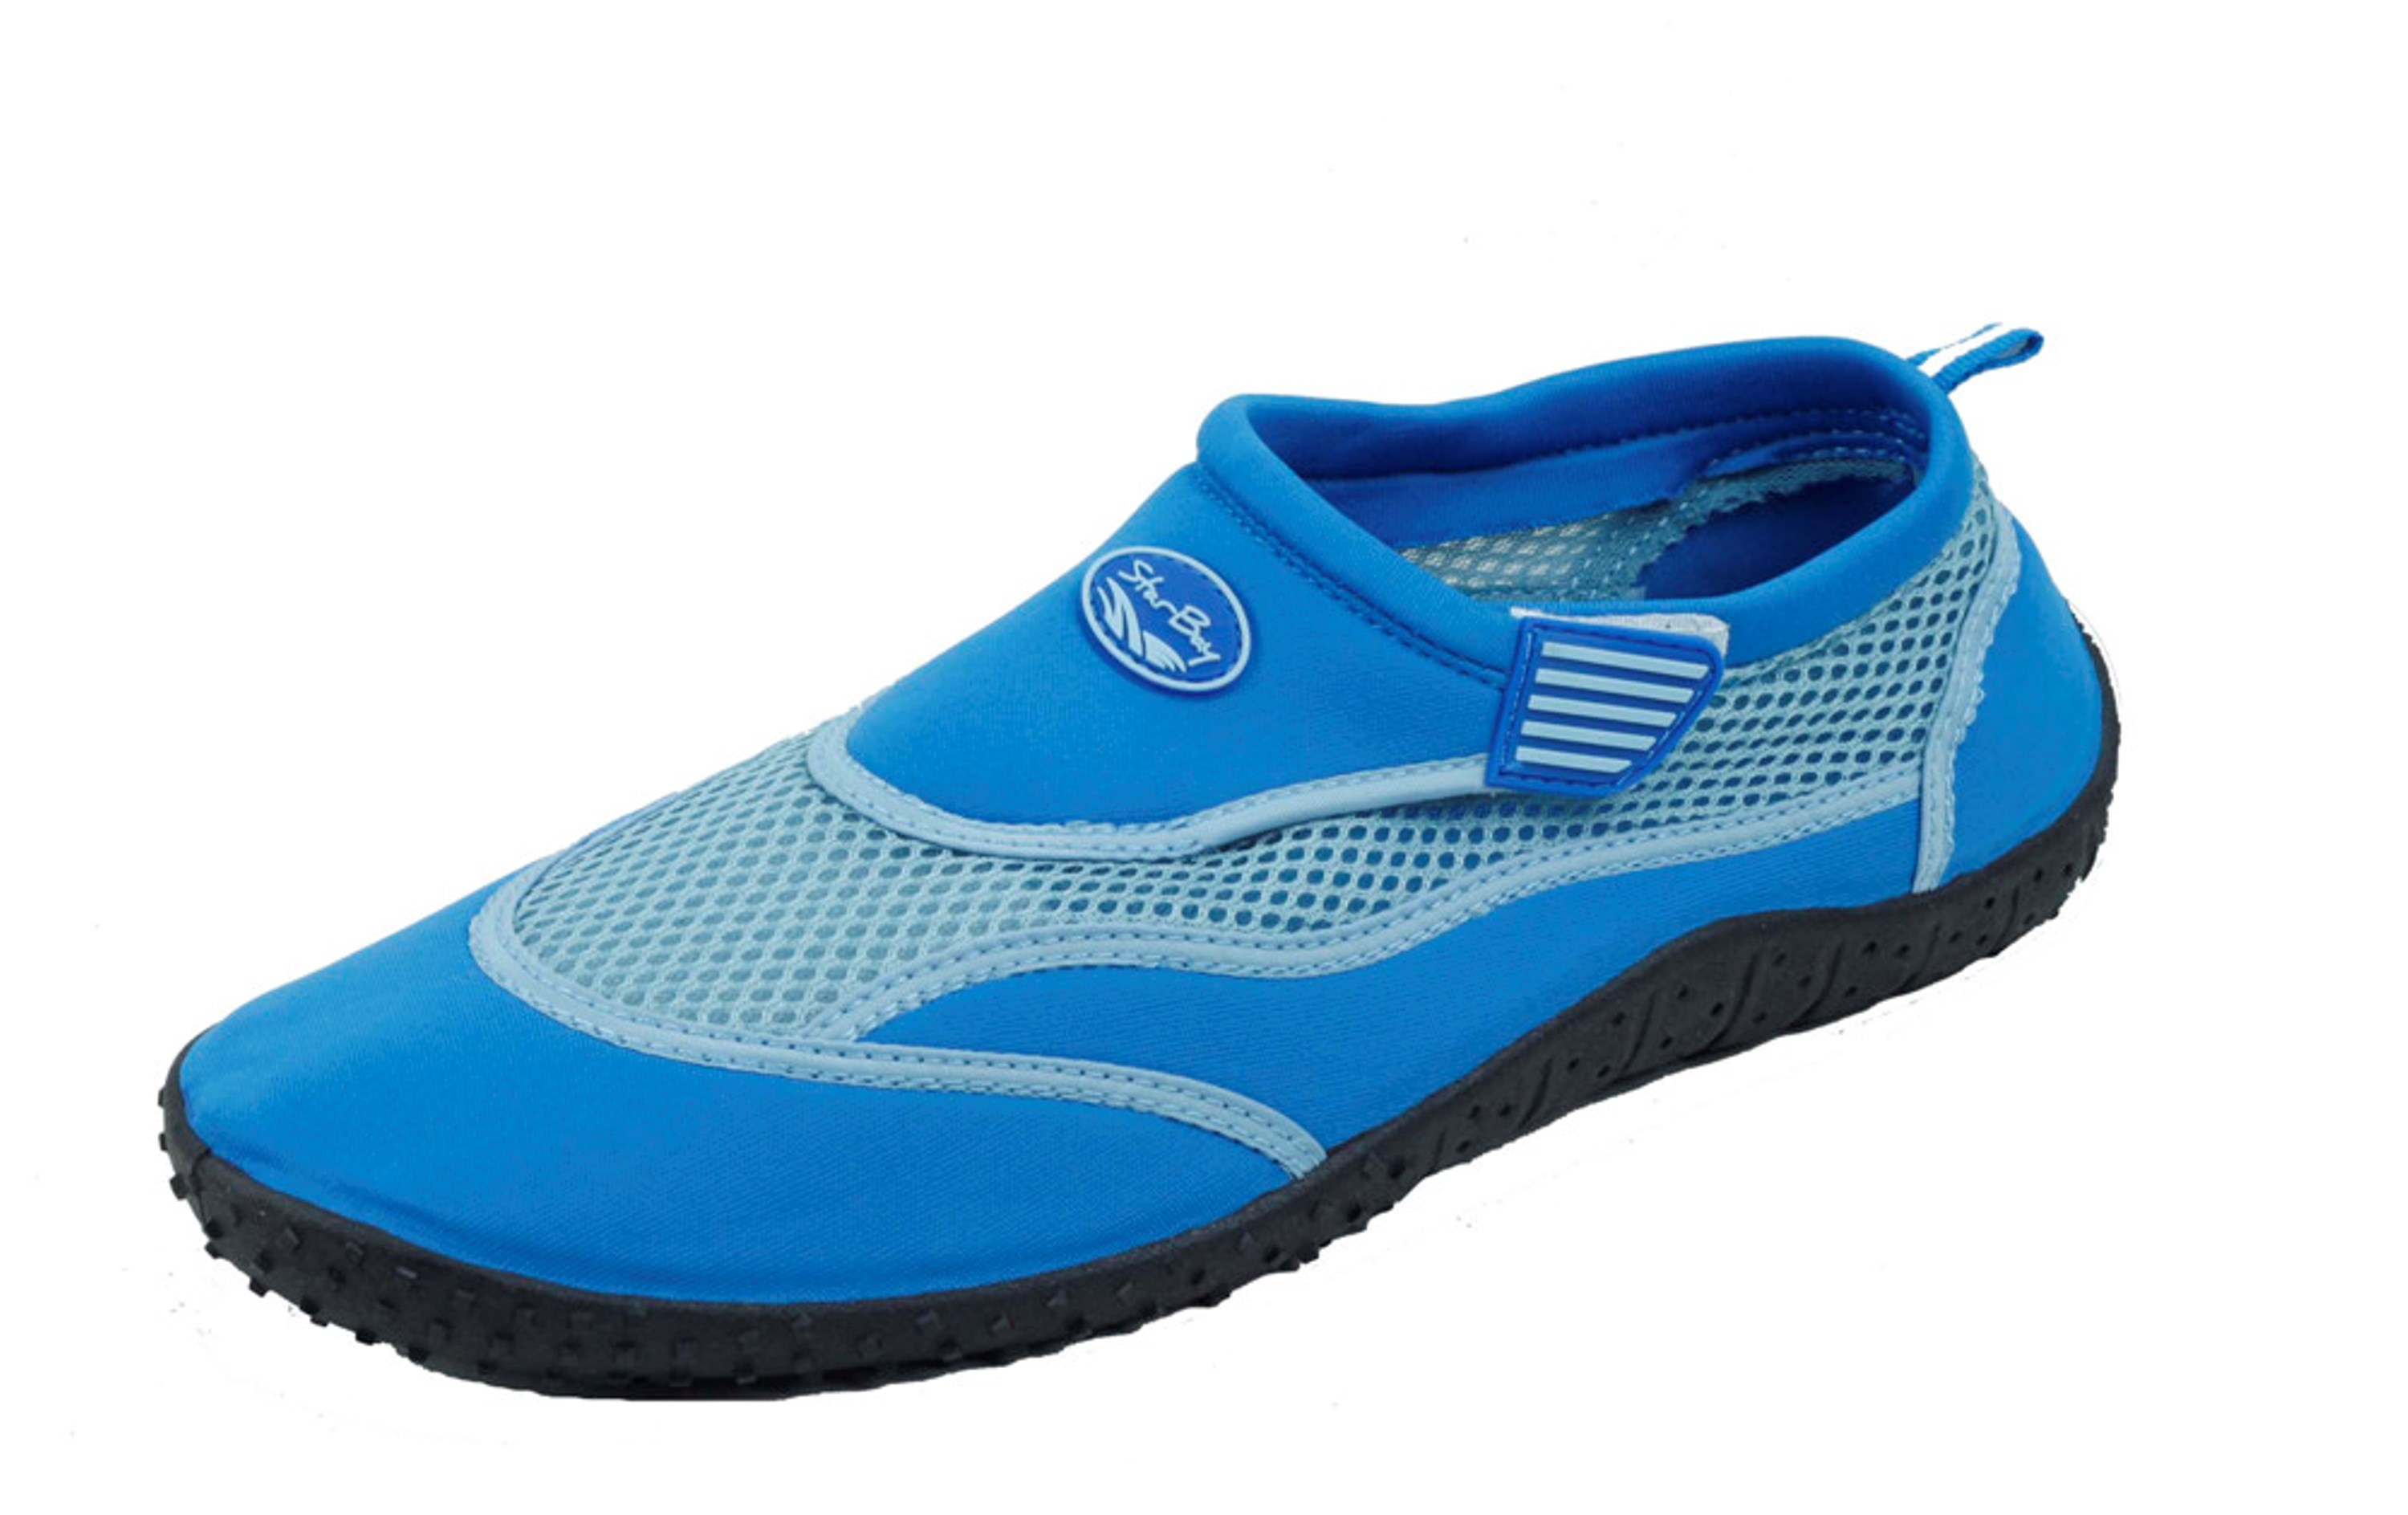 Starbay Men's Slip-On Water Shoes With Adjustable Strap Aqua Socks (#5903) - image 1 of 2